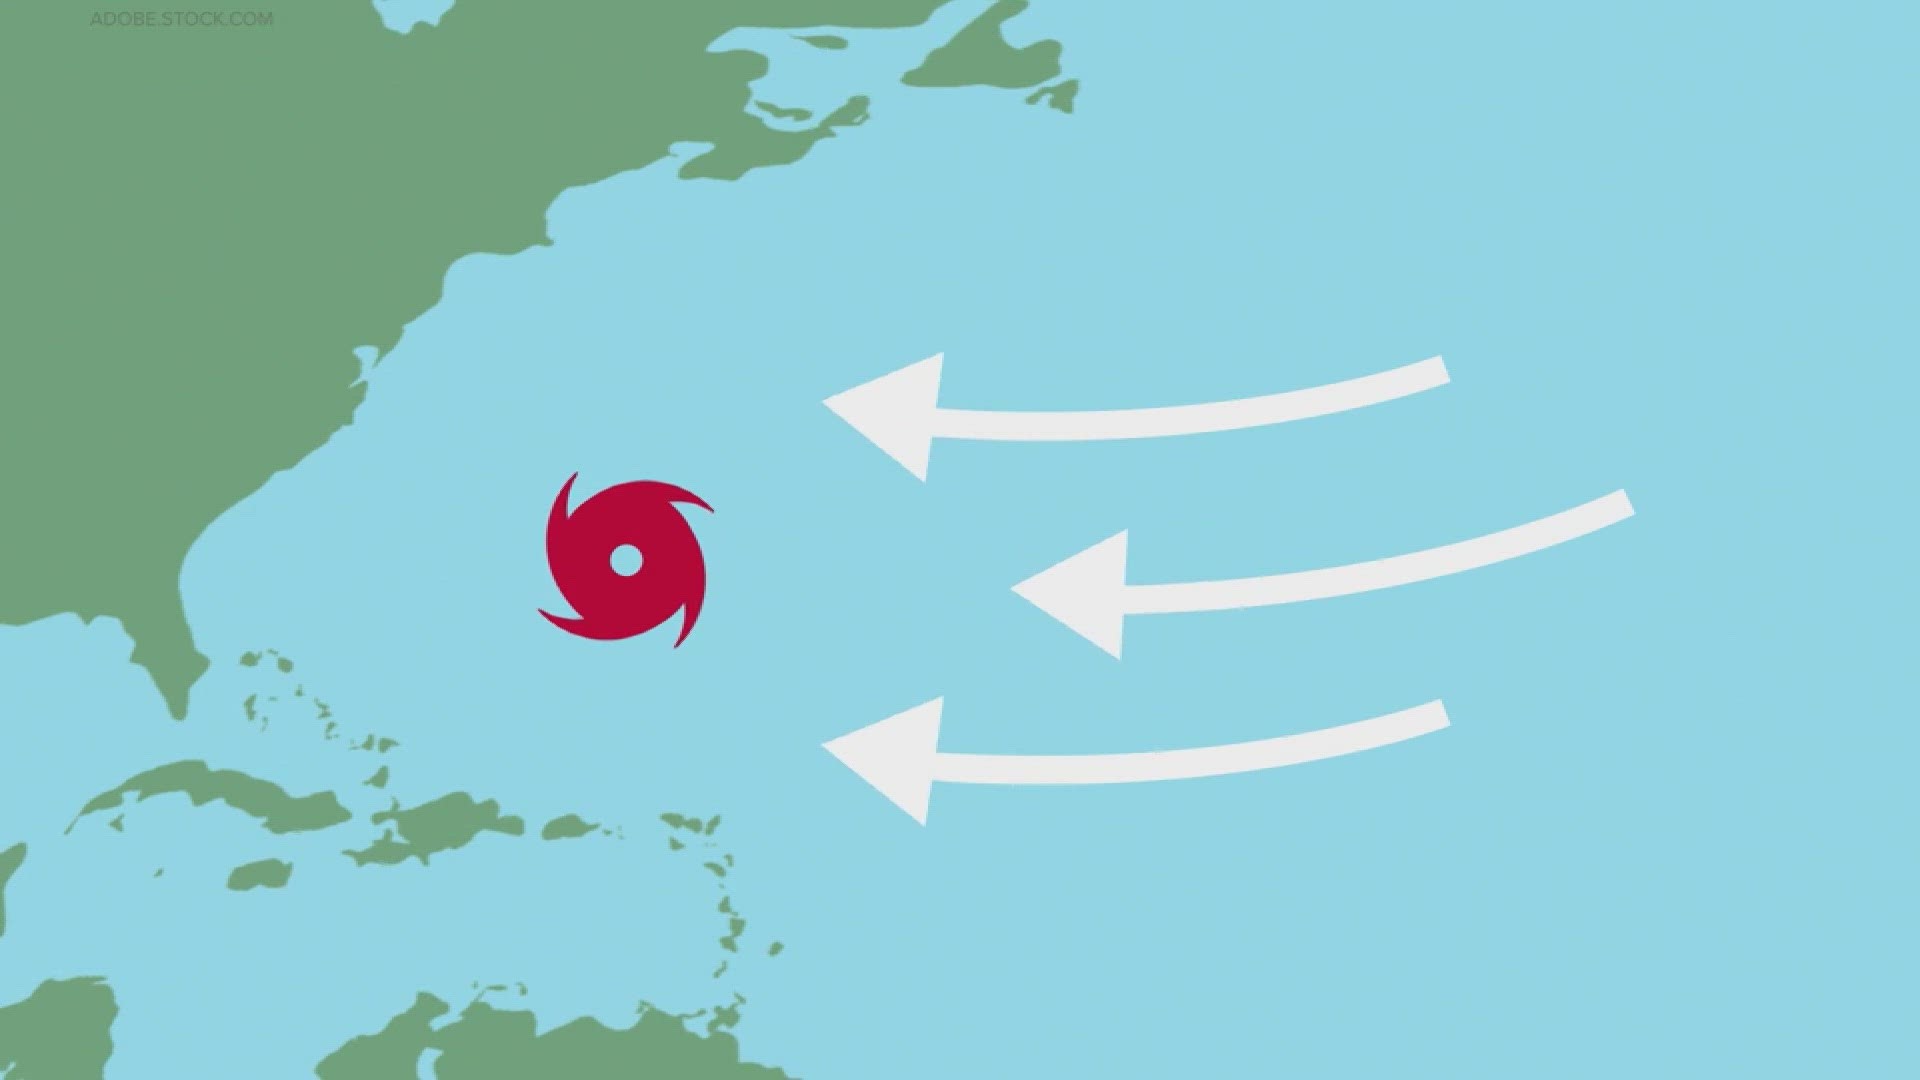 Steering currents push tropical cyclones east to west in the Atlantic Basin.